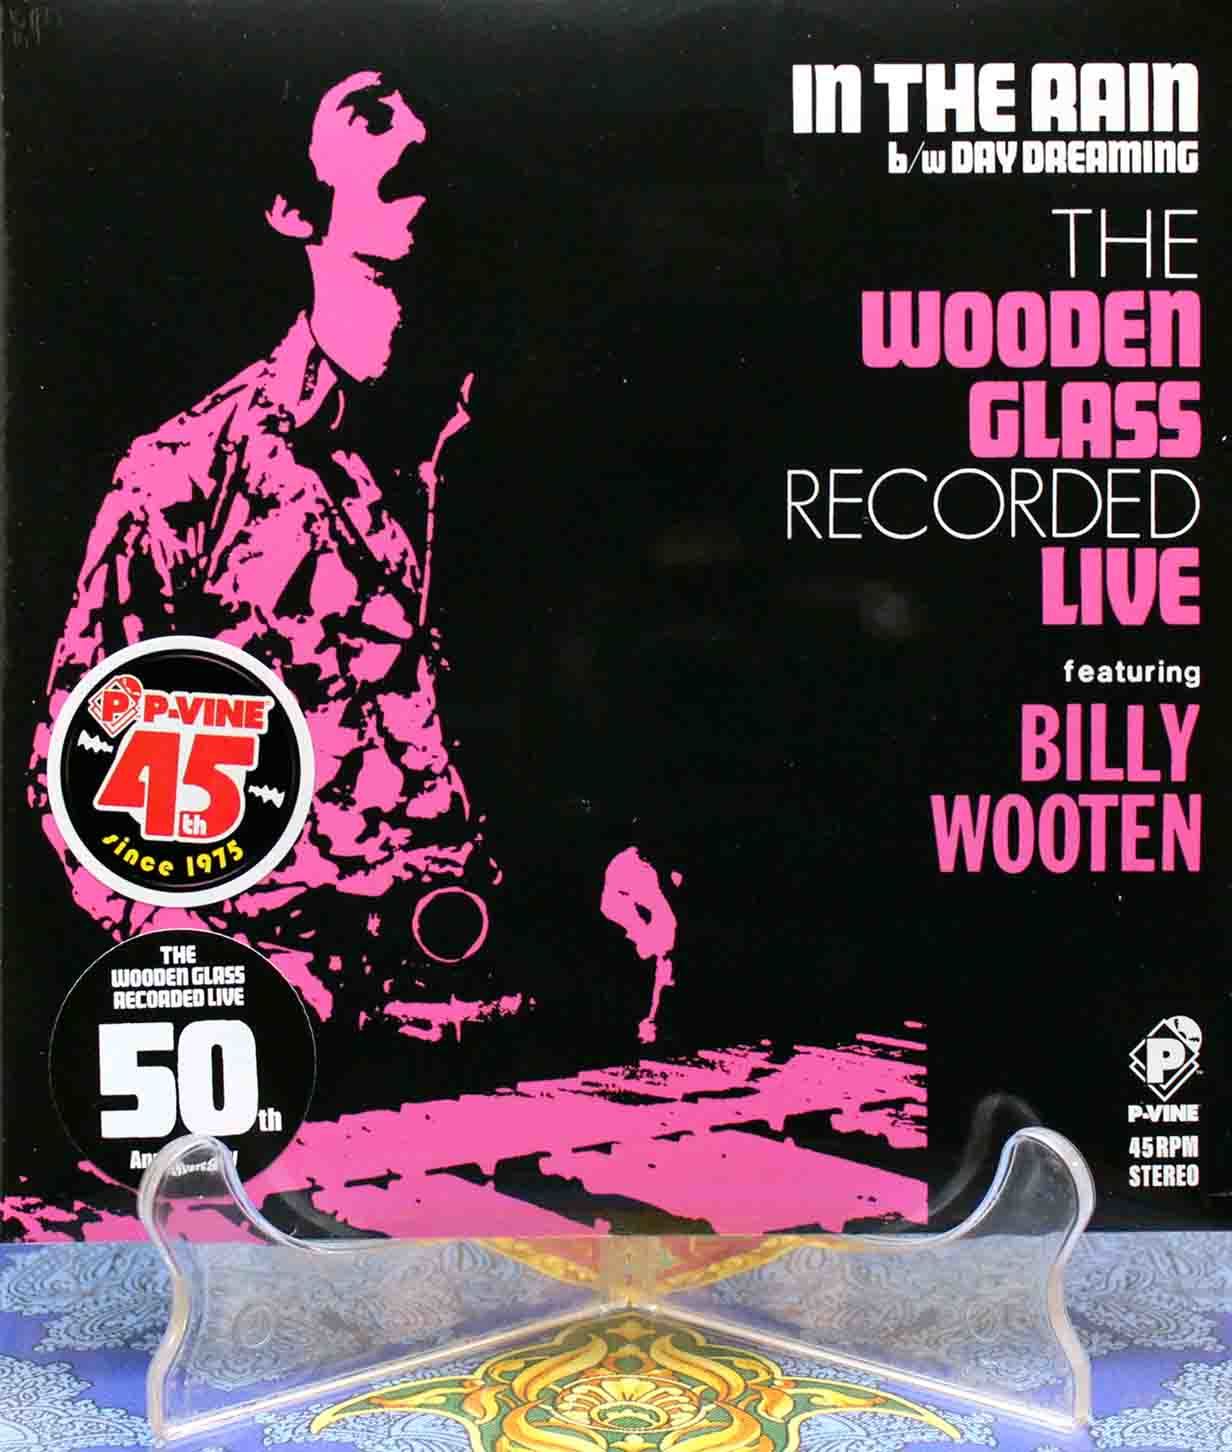 The Wooden Glass Featuring Billy Wooten ‎– In the rain 02